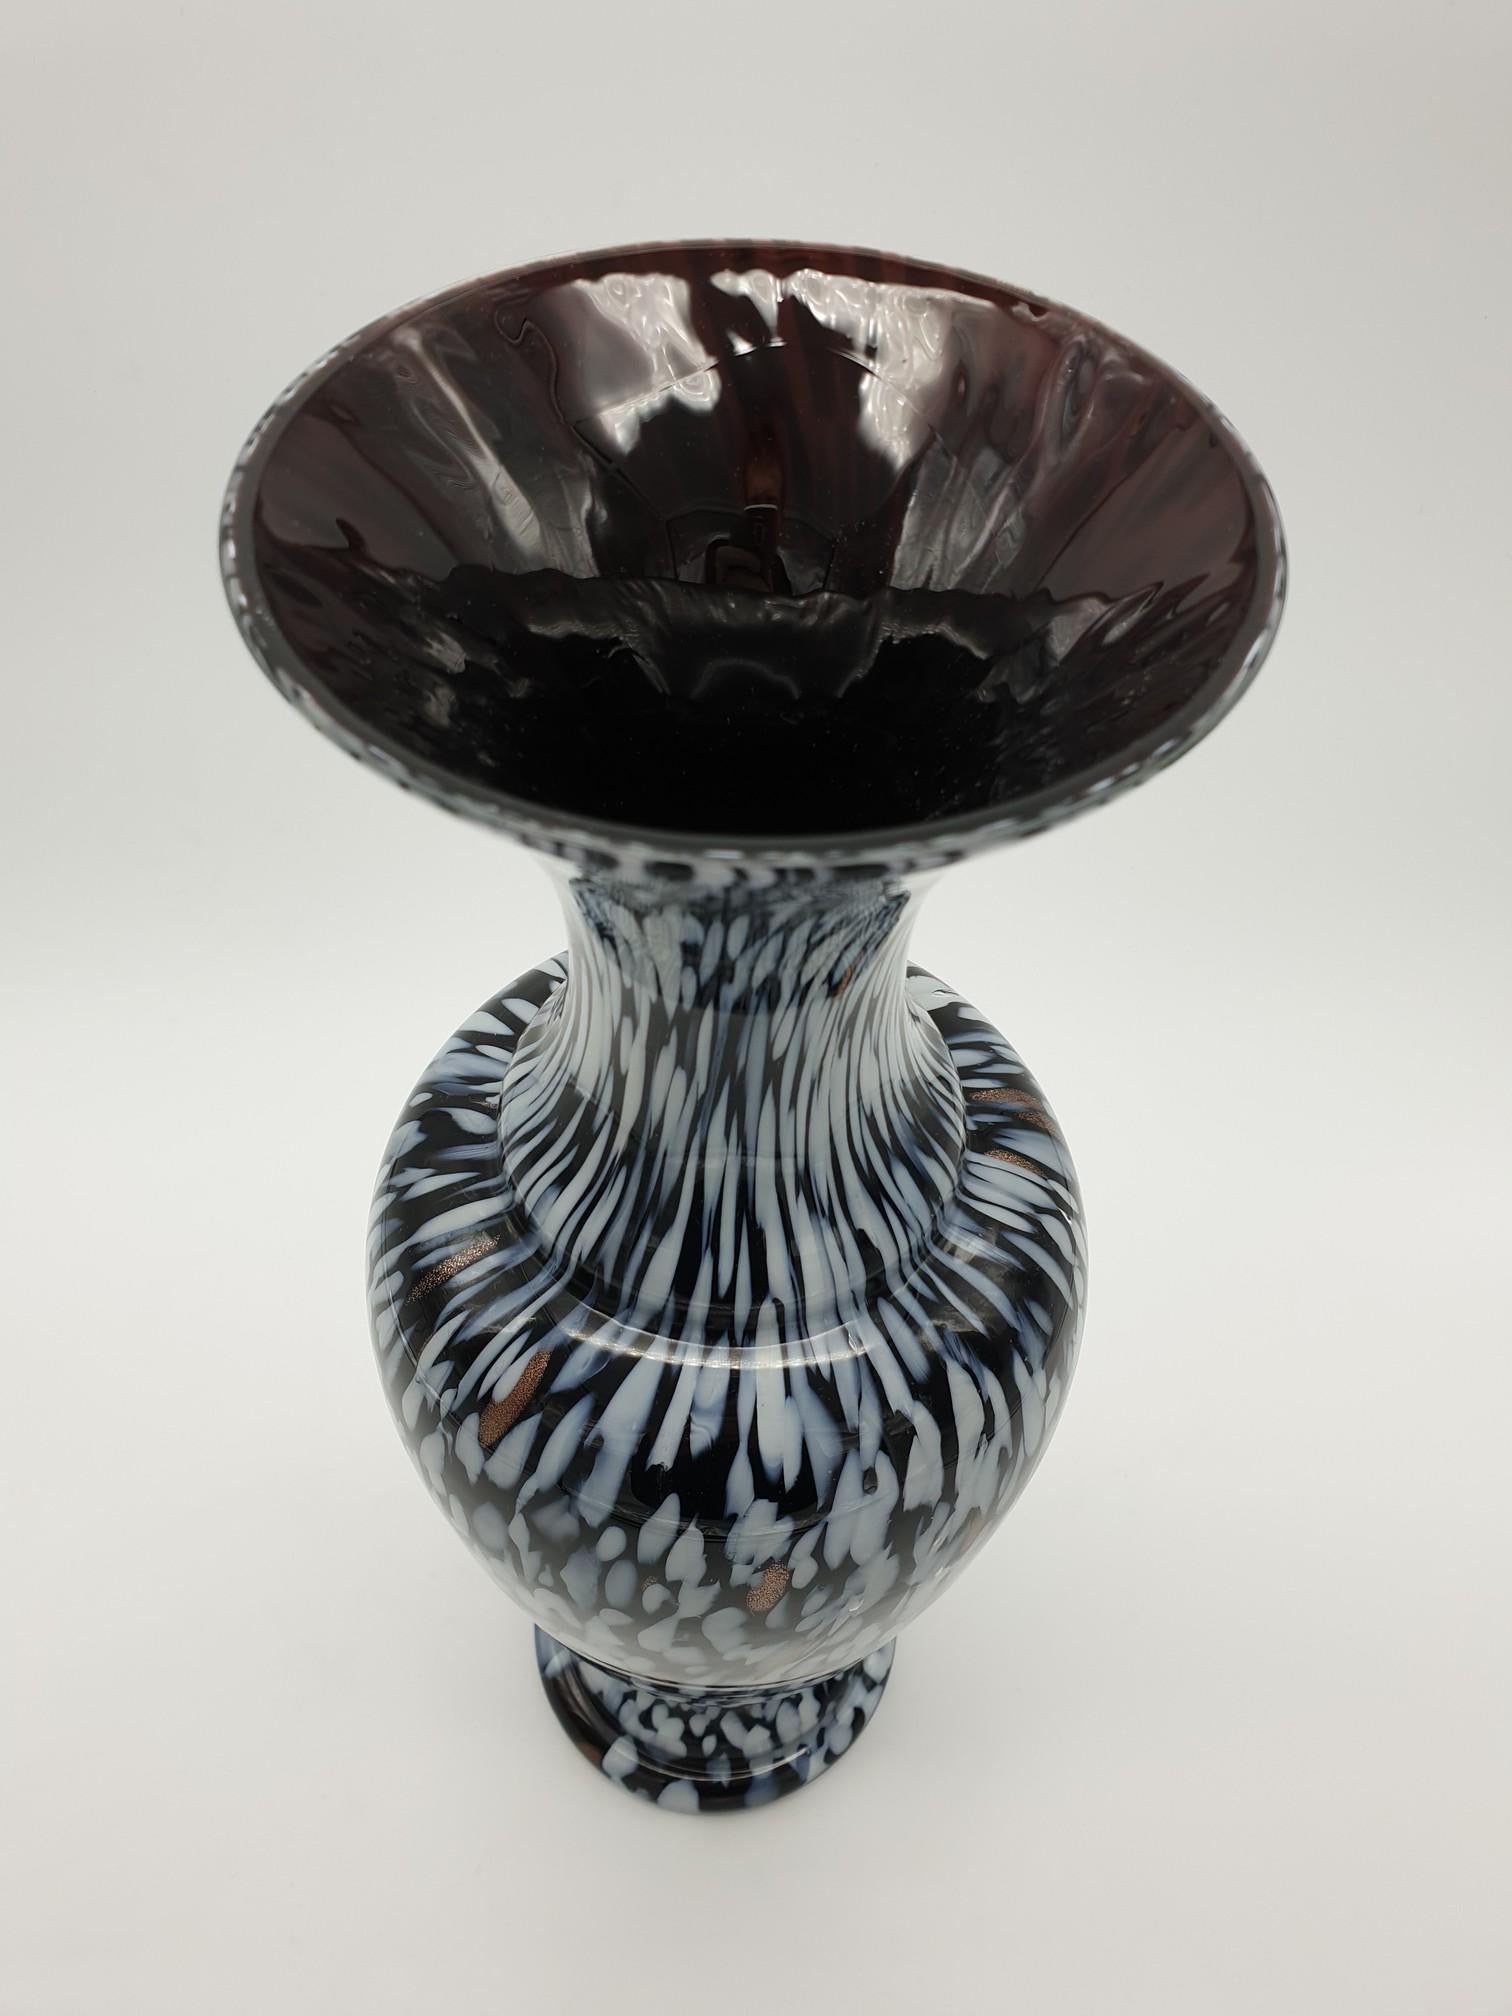 Italian Vintage Murano Glass Vase in Black Color with White Spots by Cenedese, 1970s For Sale